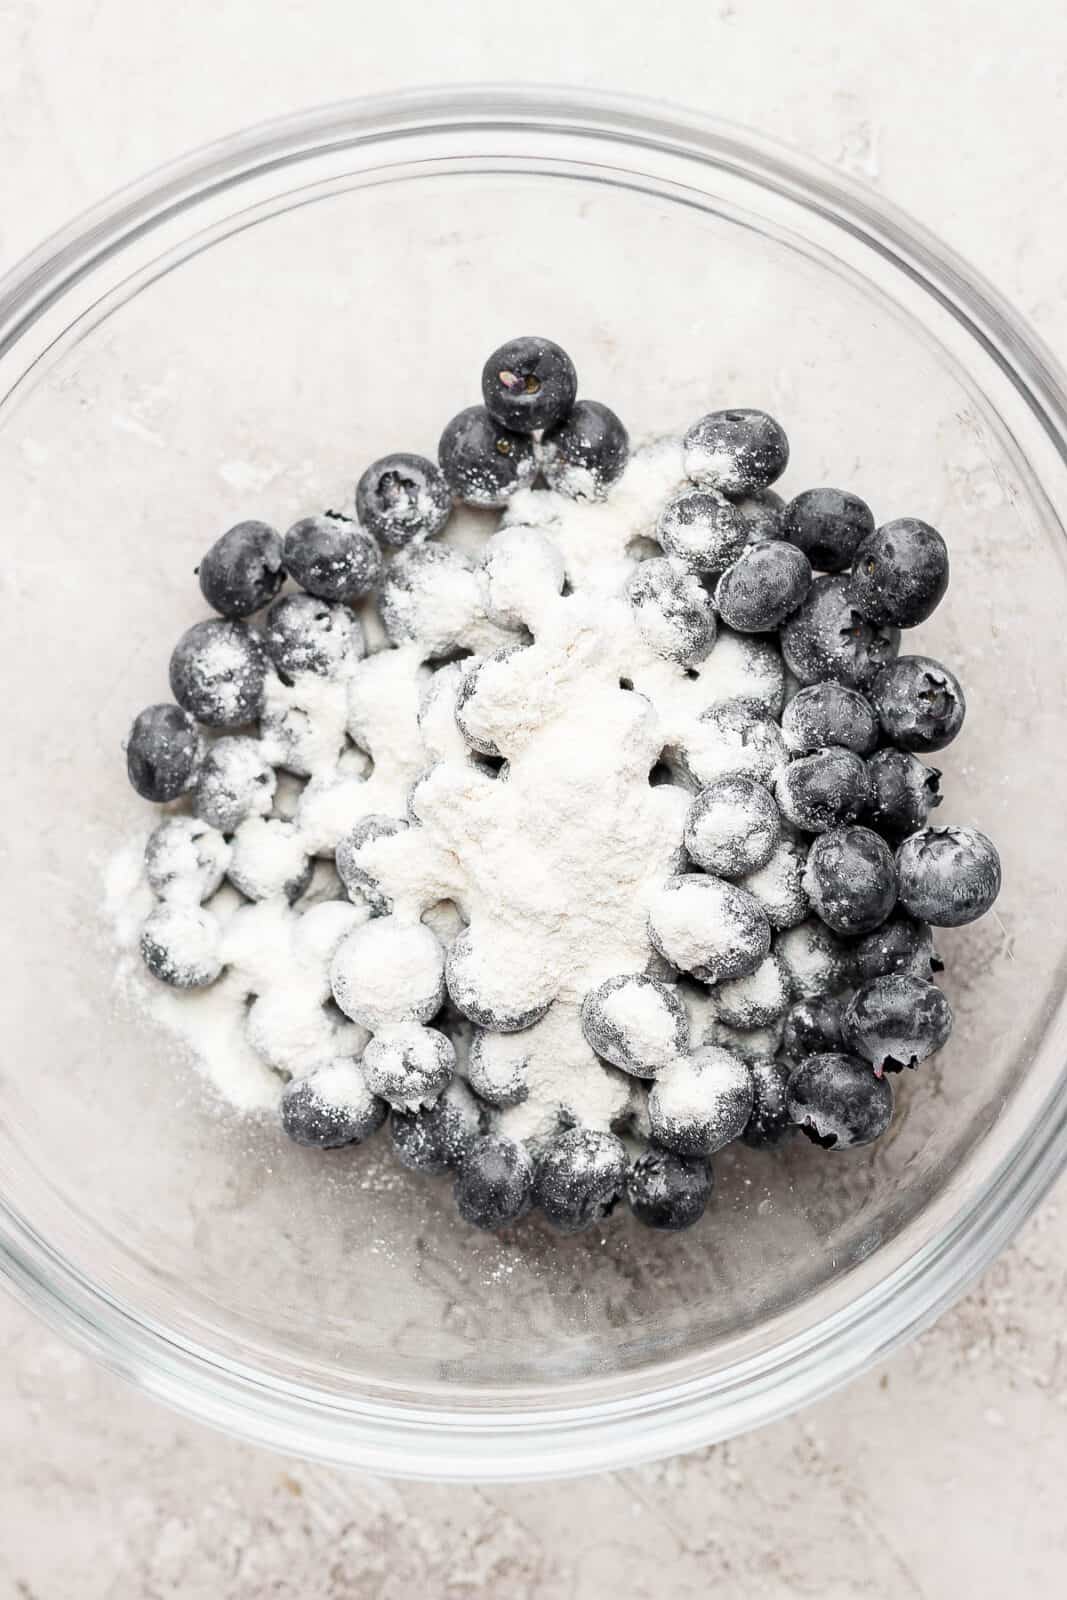 Blueberries in a bowl with a bit of cassava flour.